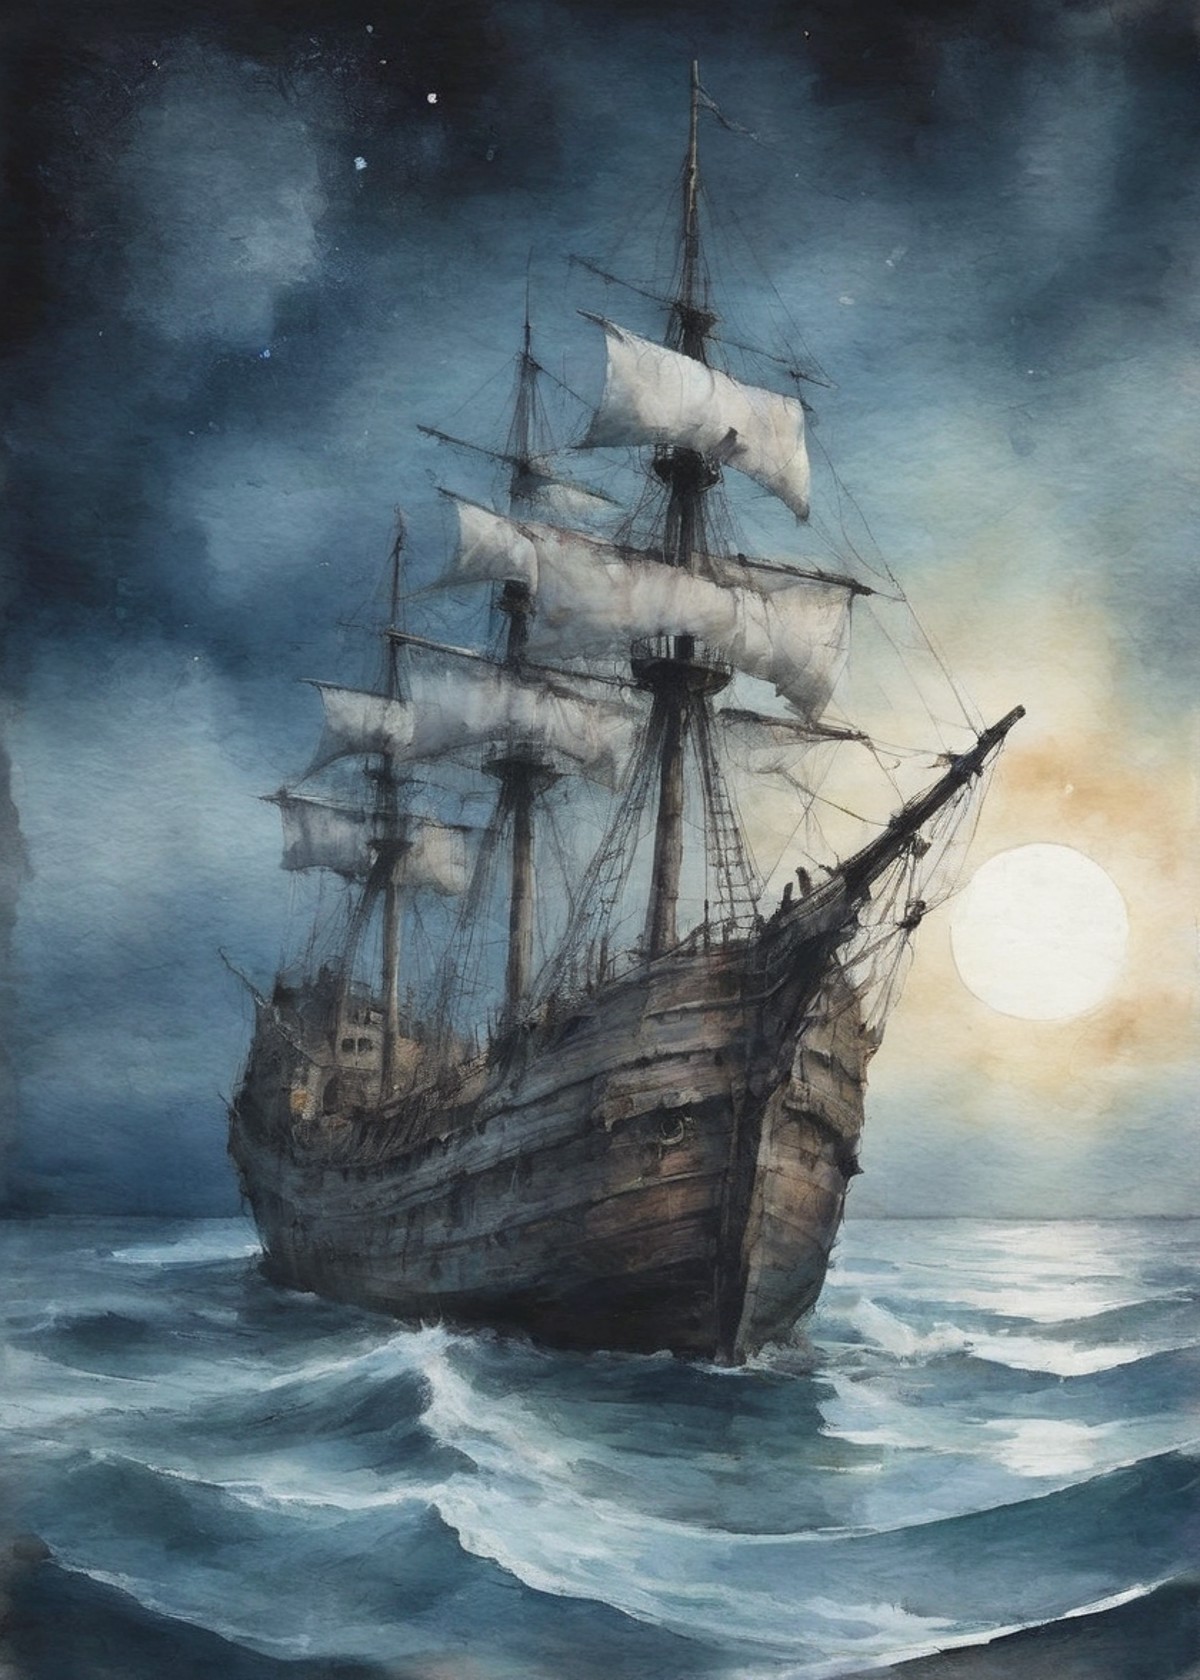 A ghost ship adrift in a moonlit sea, its tattered sails whispering secrets of the past